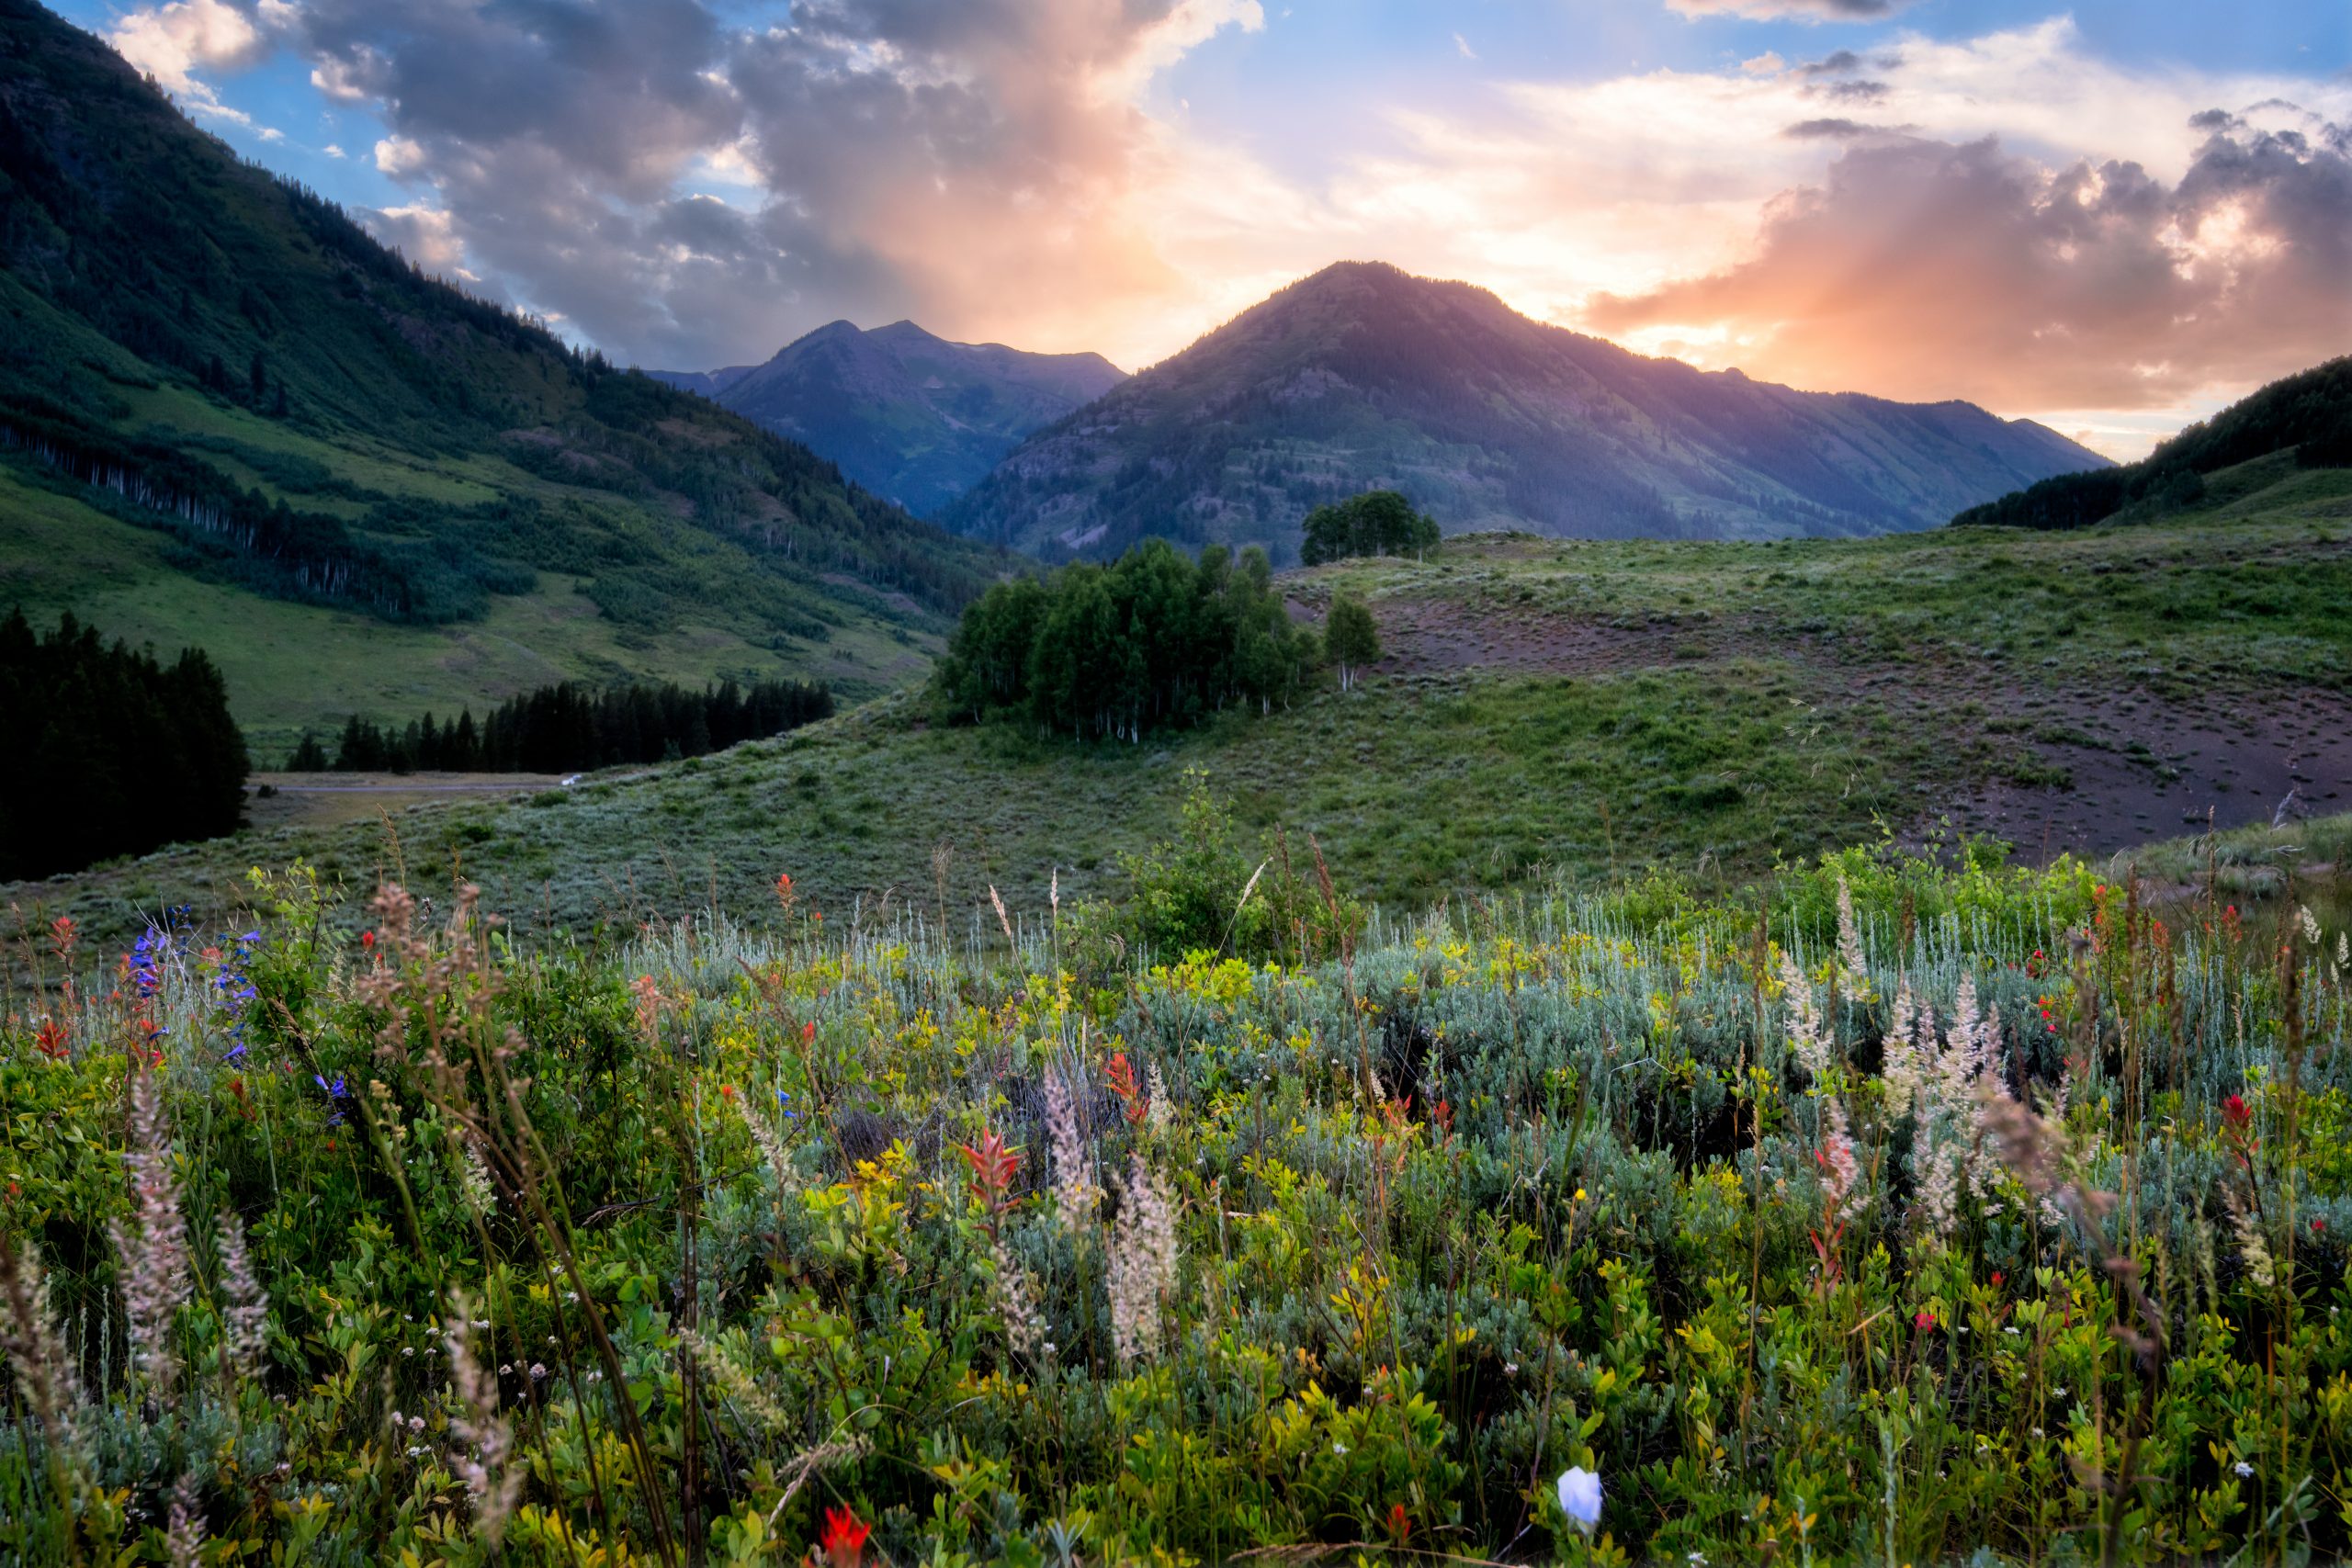 35th Annual Crested Butte Wild Flower Festival CheckItOff Travel